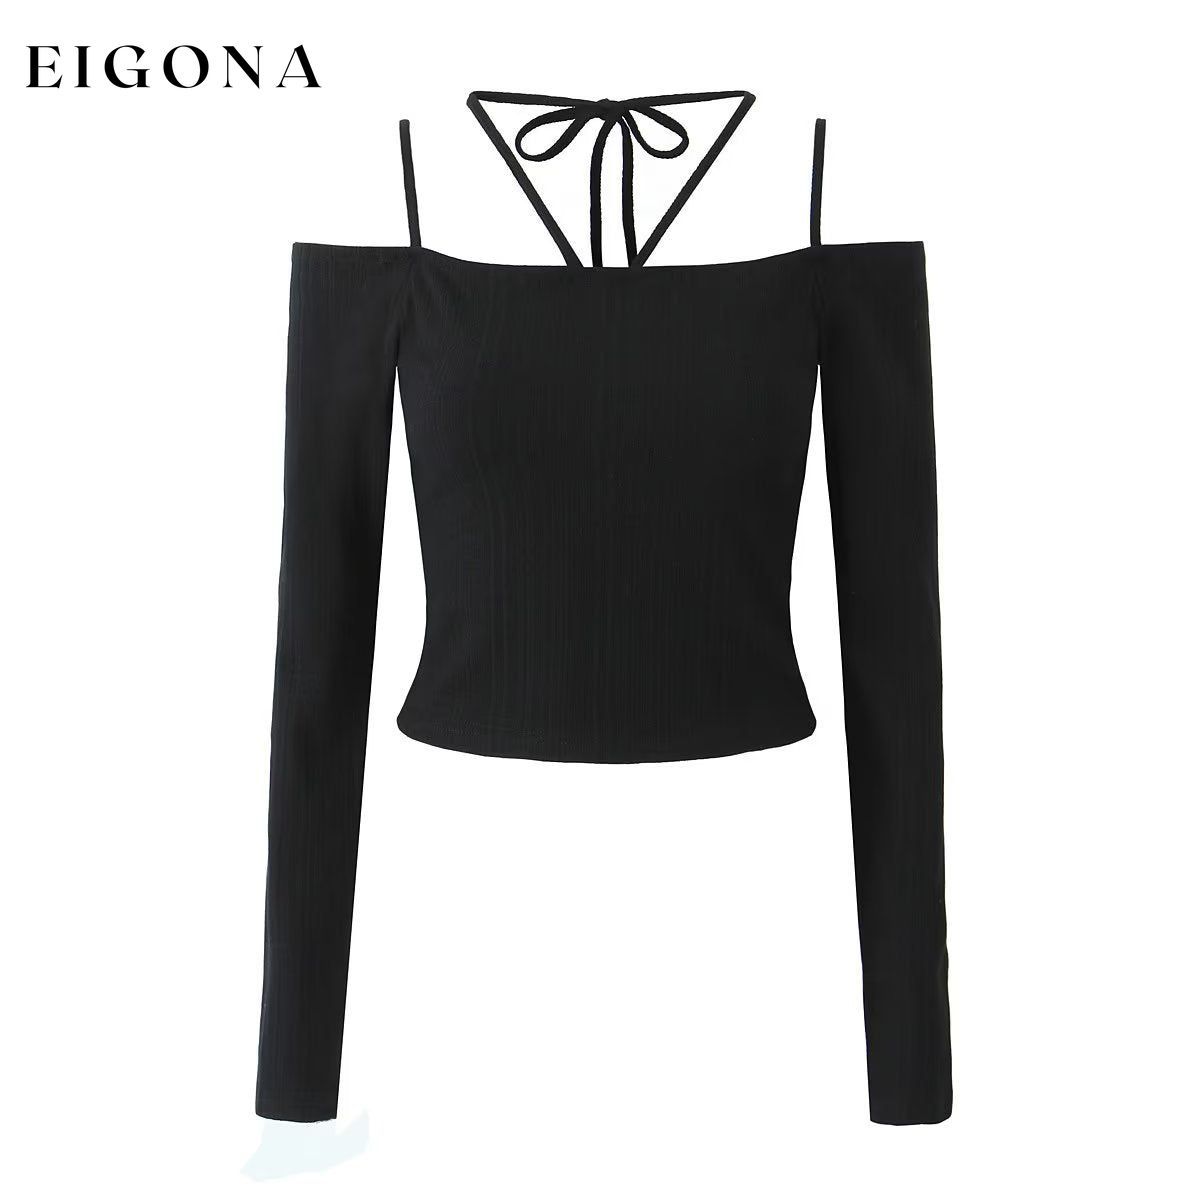 Autumn Two Color off Neck Long Sleeve Knitted T shirt Slim Fit Crop Top Black blouses clothes long sleeve tops off the shoulder shirt shirt shirts top tops